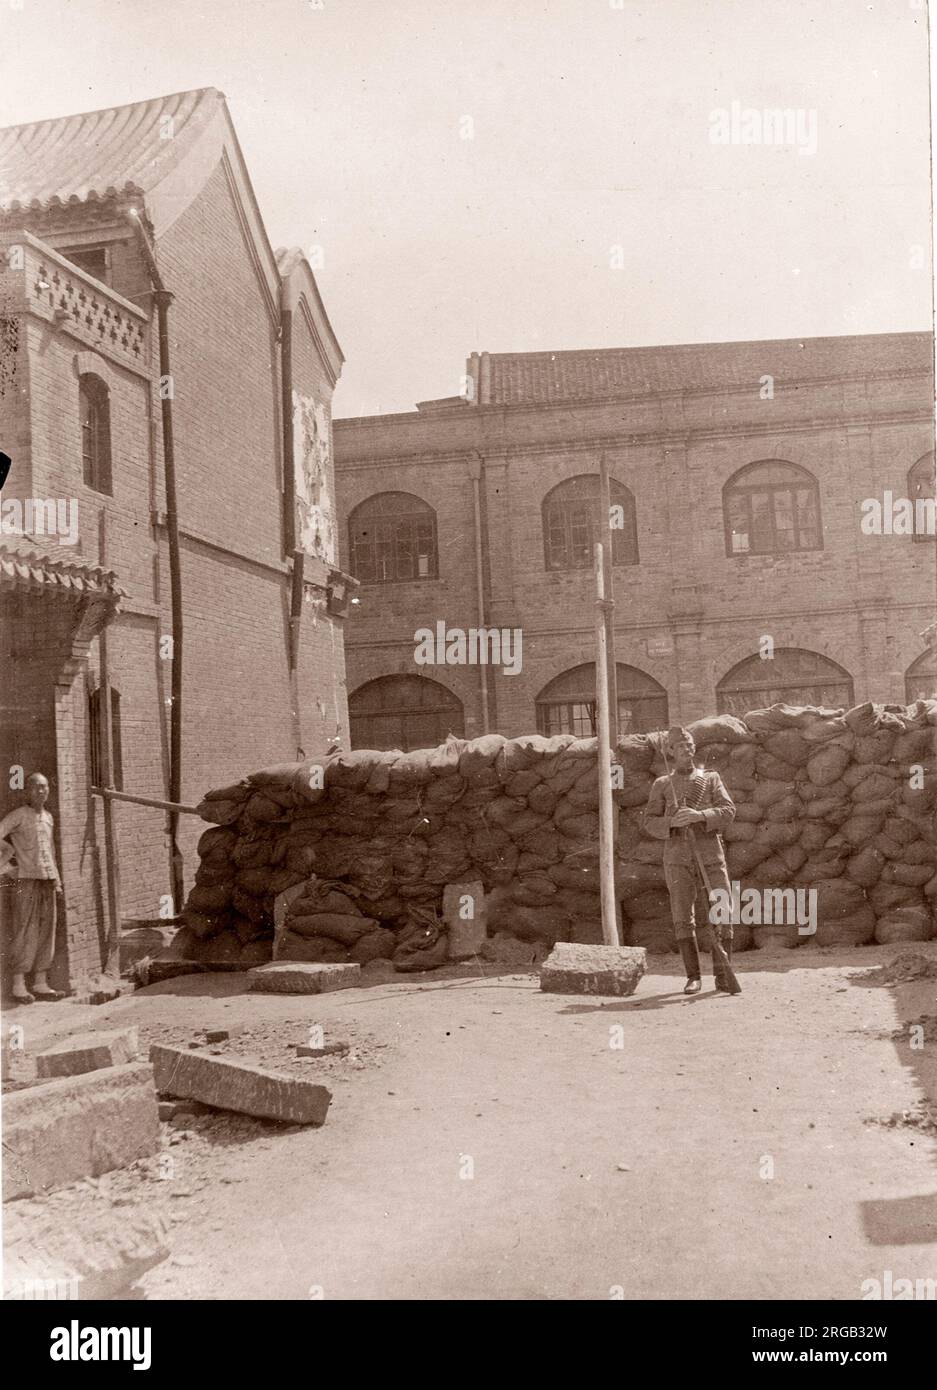 Vintage Photograph China c.1900 - Boxer rebellion or uprising, Yihetuan Movement - image from an album of a British soldier who took part of the supression of the uprising - fortification Tientsin, Tianjin Stock Photo